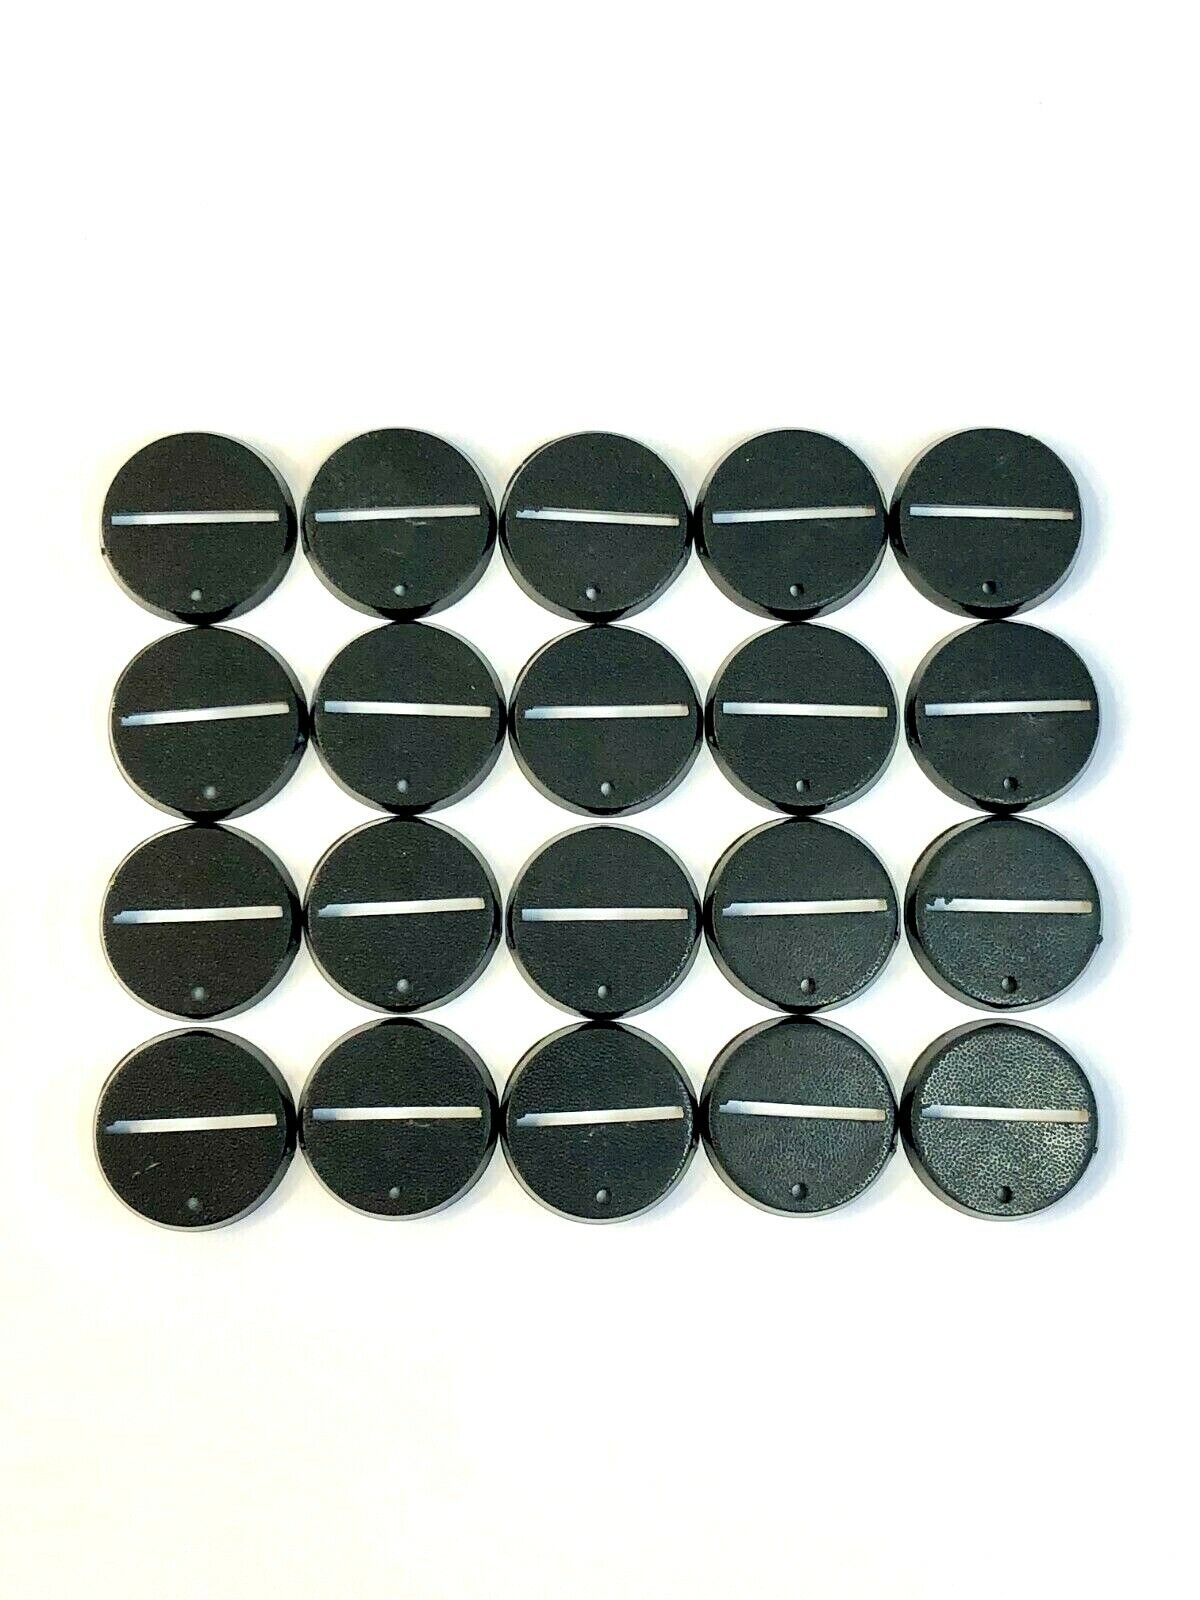 Lot Of 20 32mm Round SLOT Bases For Warhammer 40k + AoS Games Workshop Bitz  Unbranded Does not apply